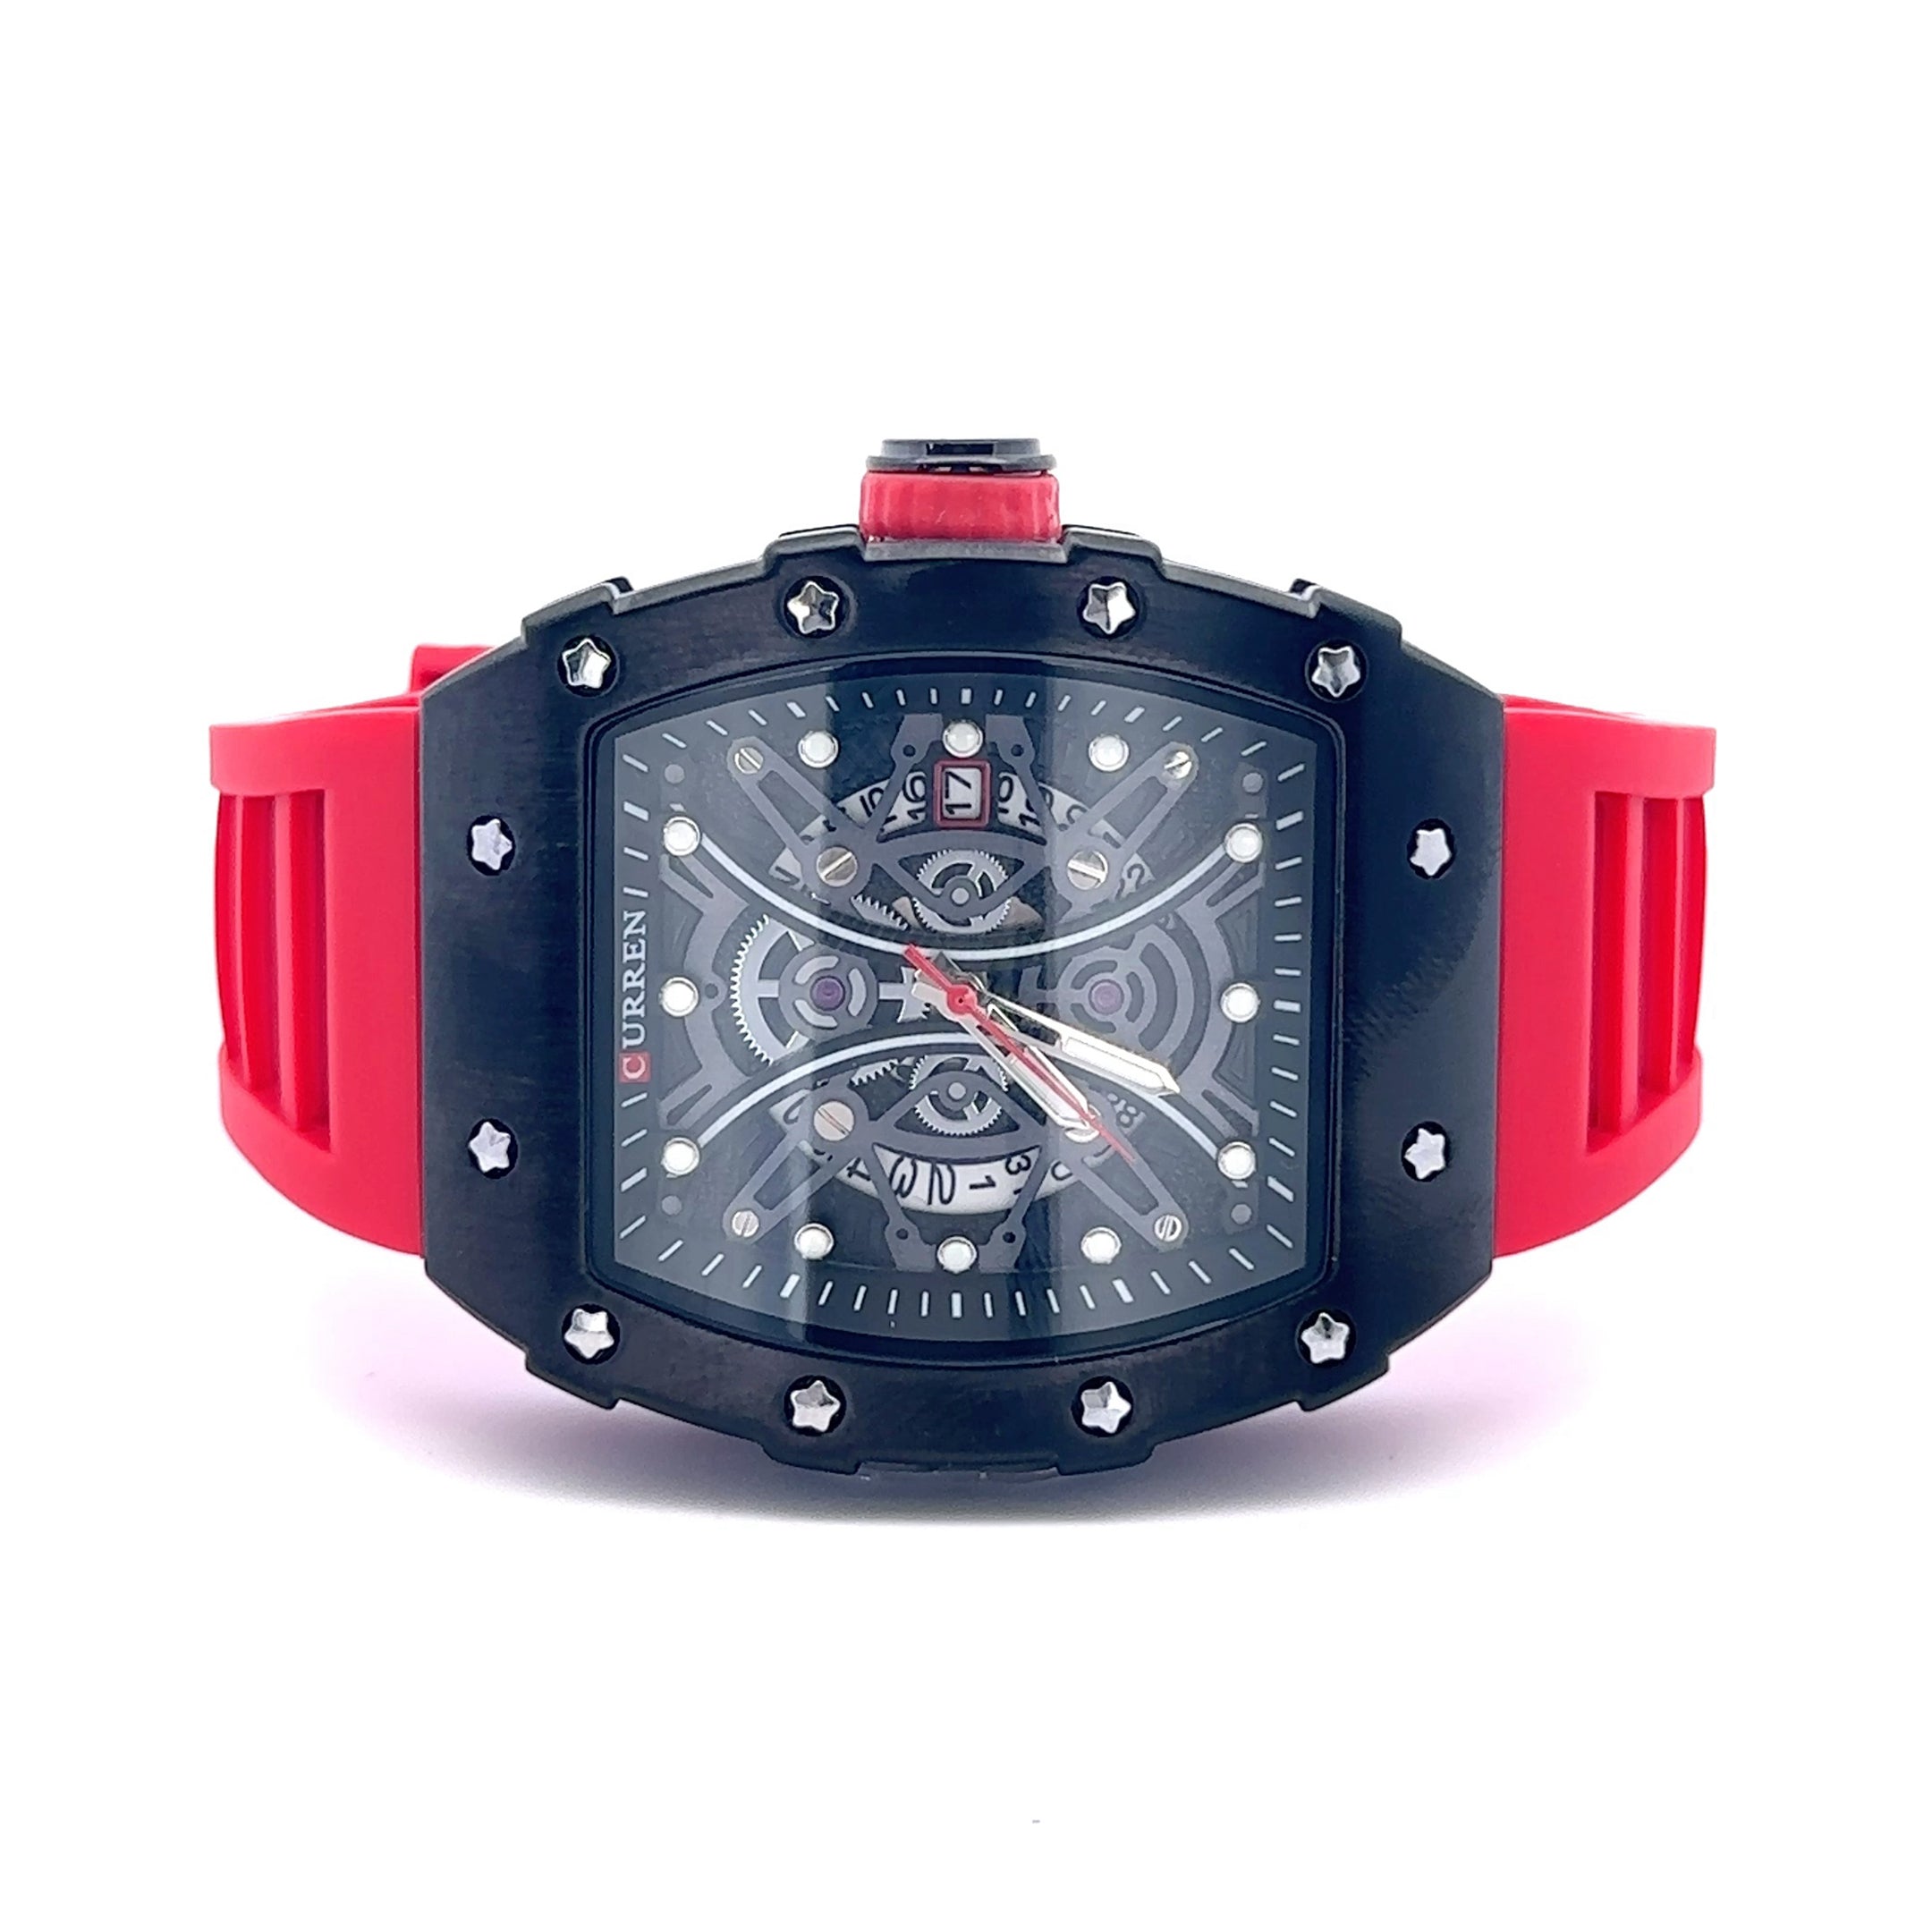 REVELAR CURREN RED LEATHER ICED OUT WATCH I 541566